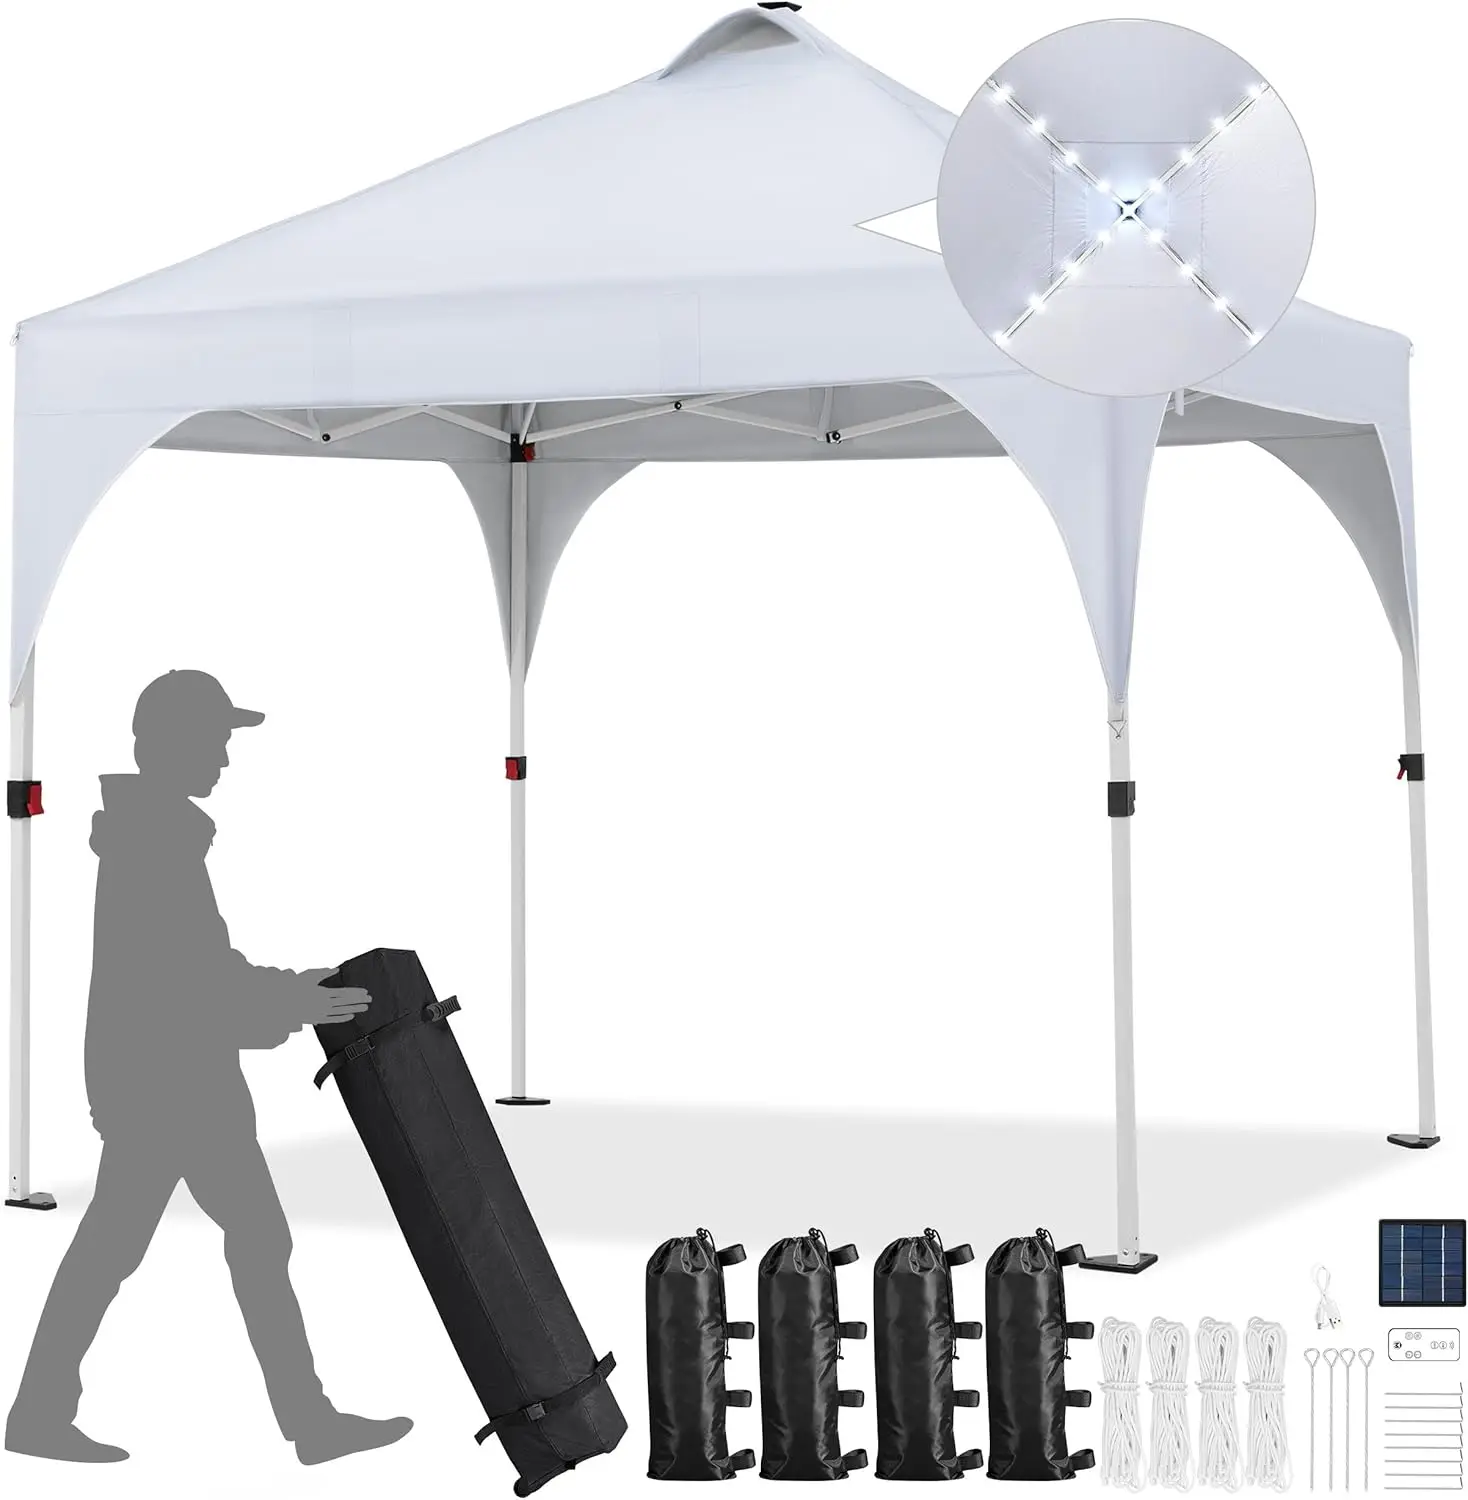 

10x10ft Pop-Up Canopy Tent with 17 Solar LED Lights, Outdoor Garden Gazebo, Ez Set-up Instant Sun Shelter Tent w/Wheeled Bag